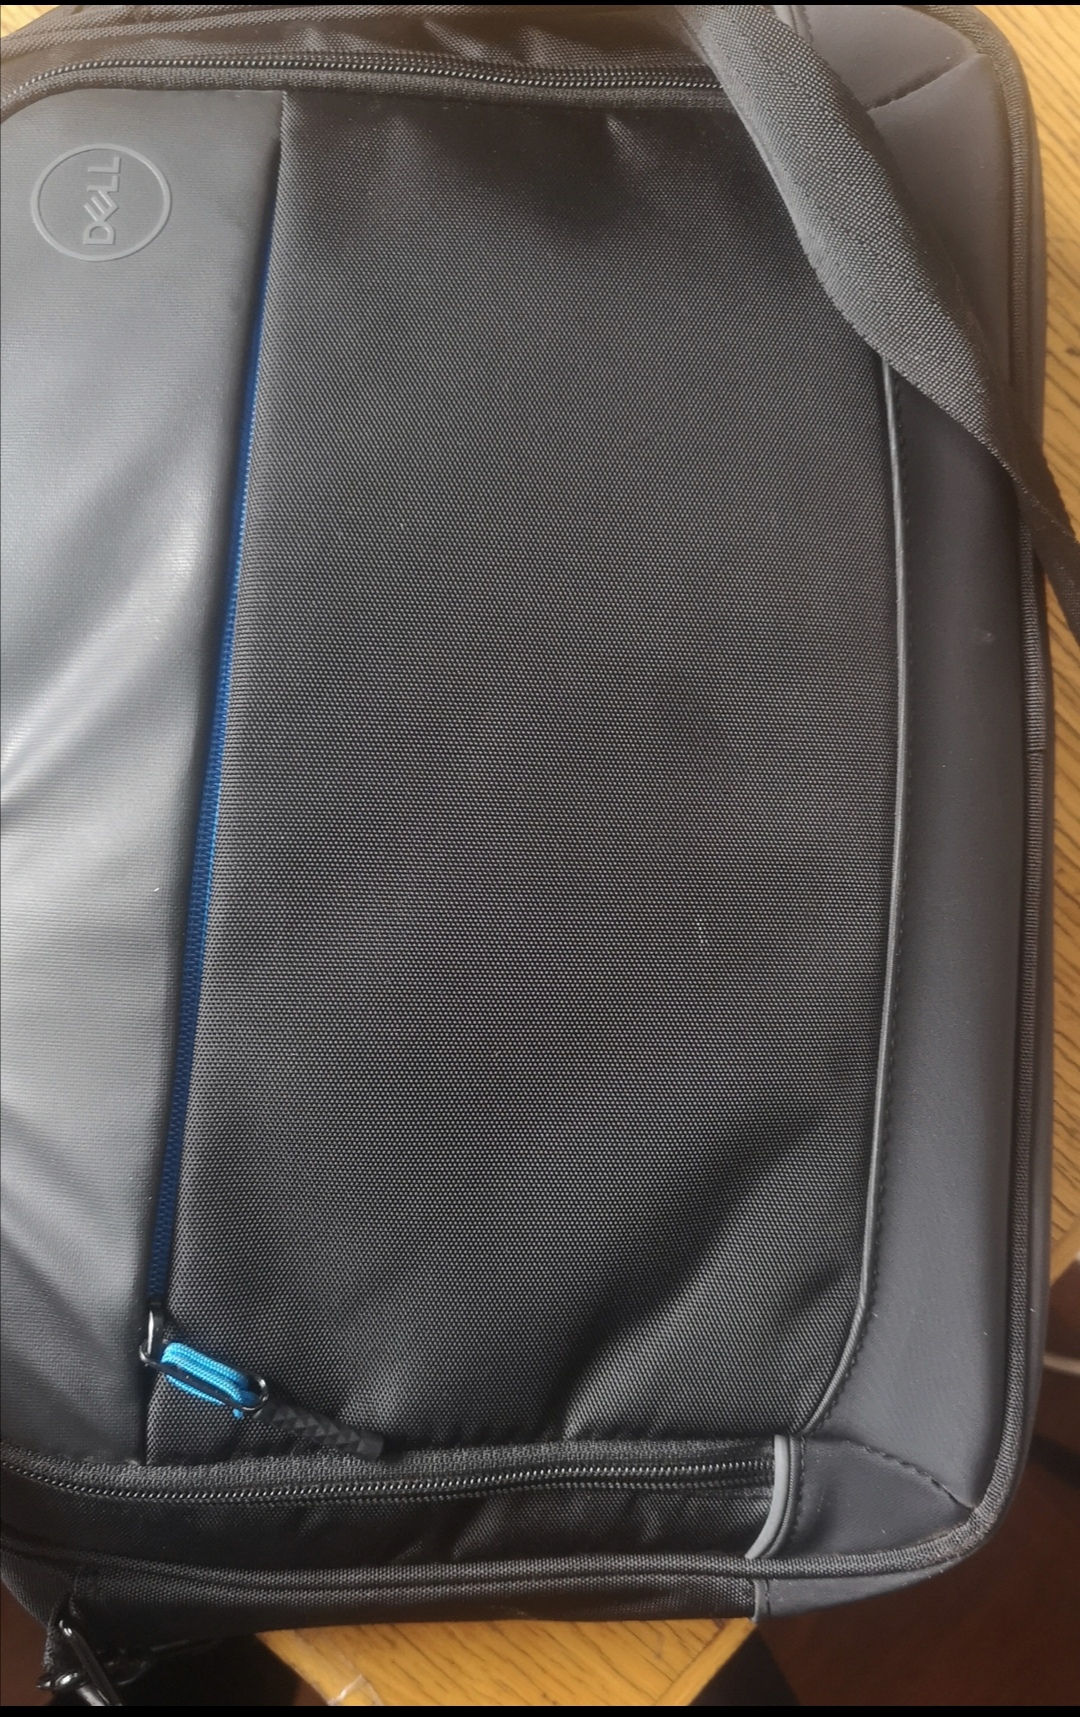 Very neat and classy dell laptop bag